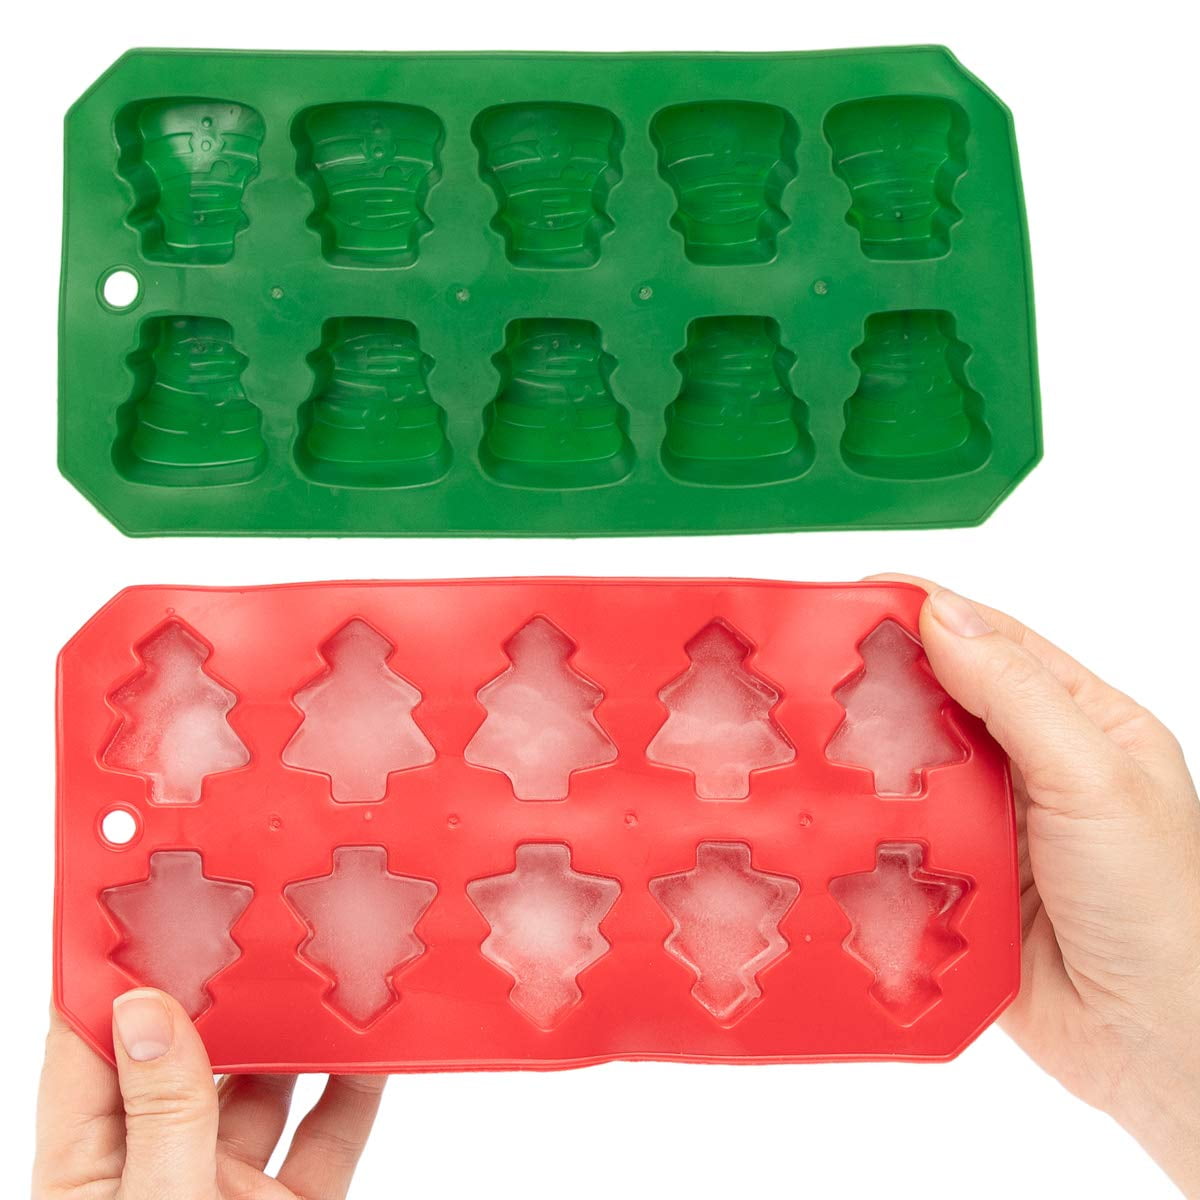 Christmas Ice Trays Santa and Trees Lot of 2 Ice Shapers Molds